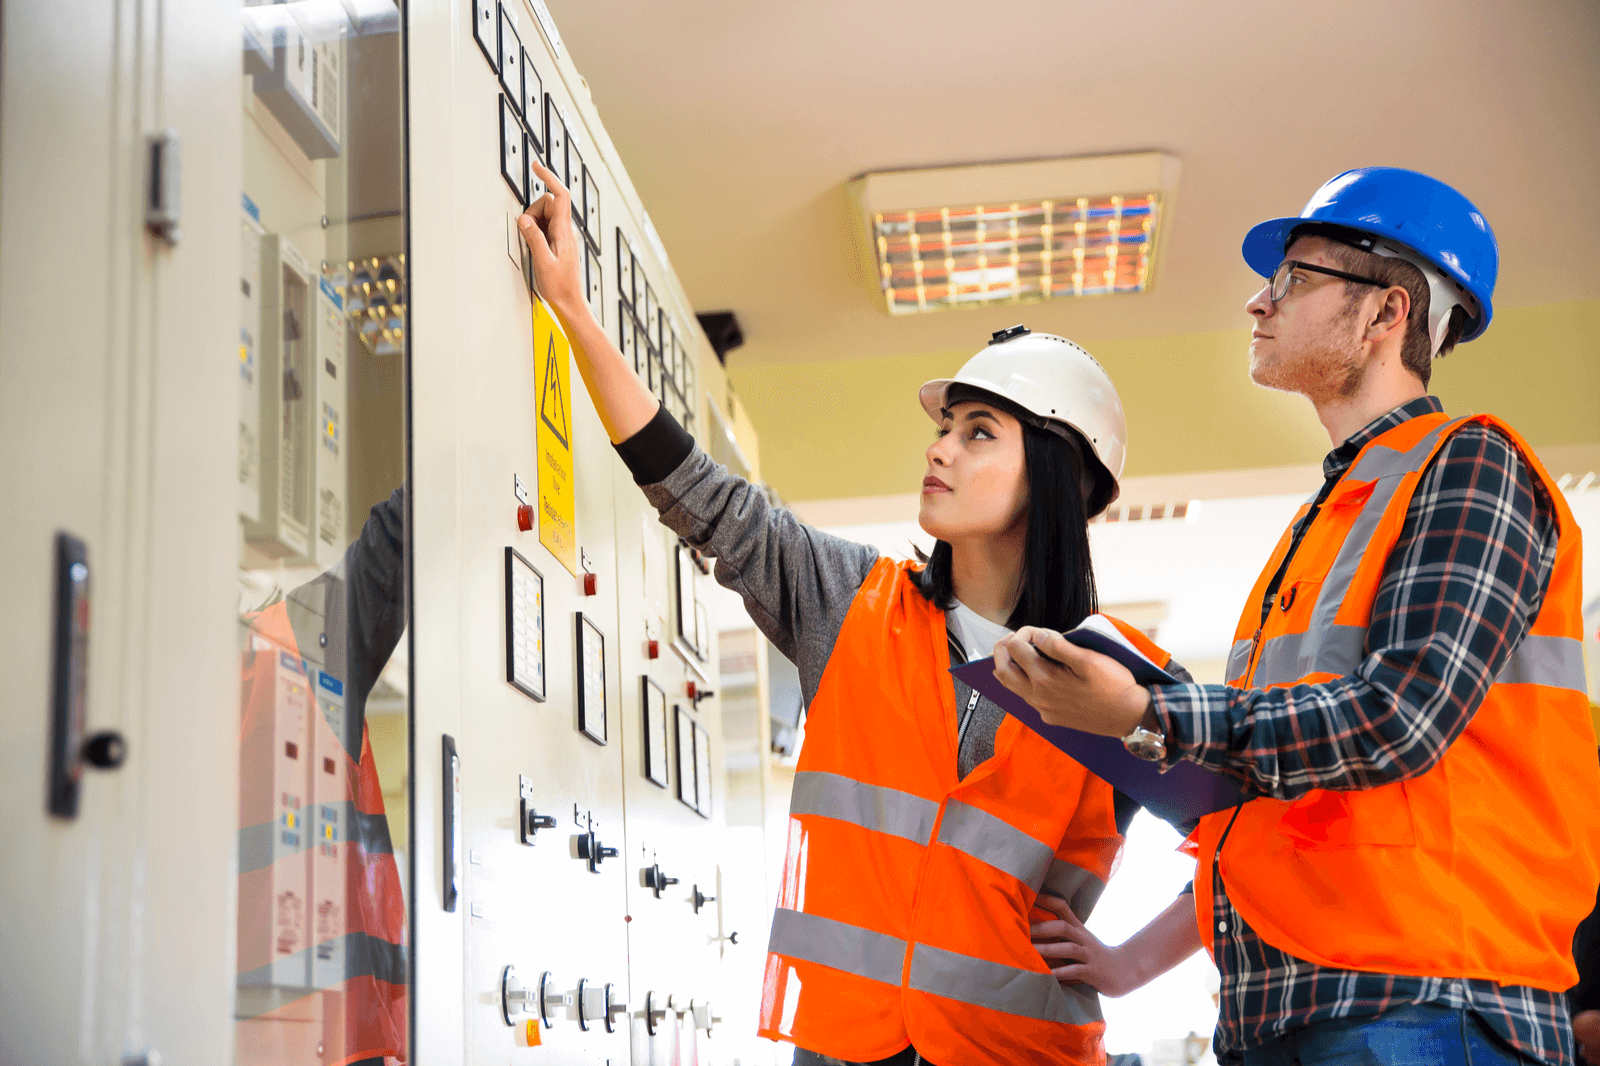 two people in hardhats looking at electrical meter on a panel